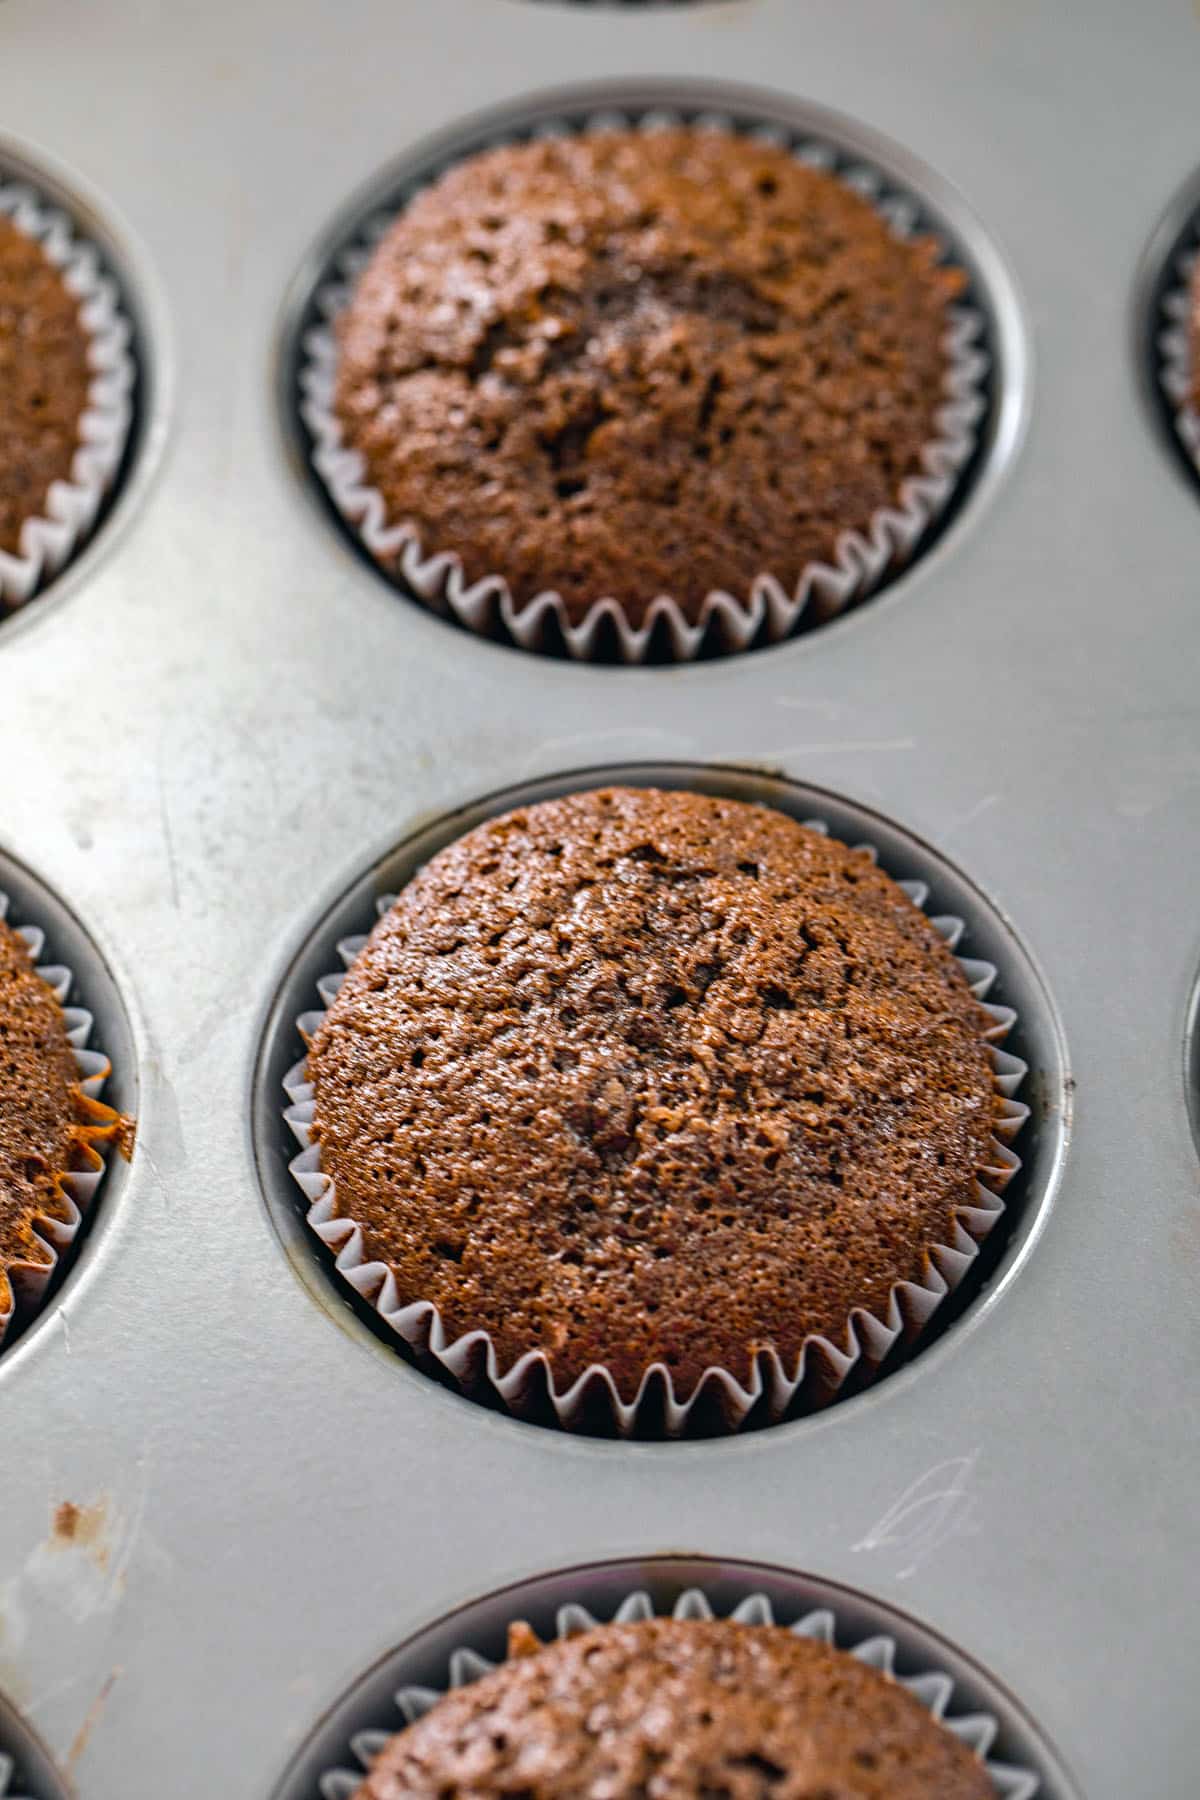 Chocolate cupcakes baked in tin.